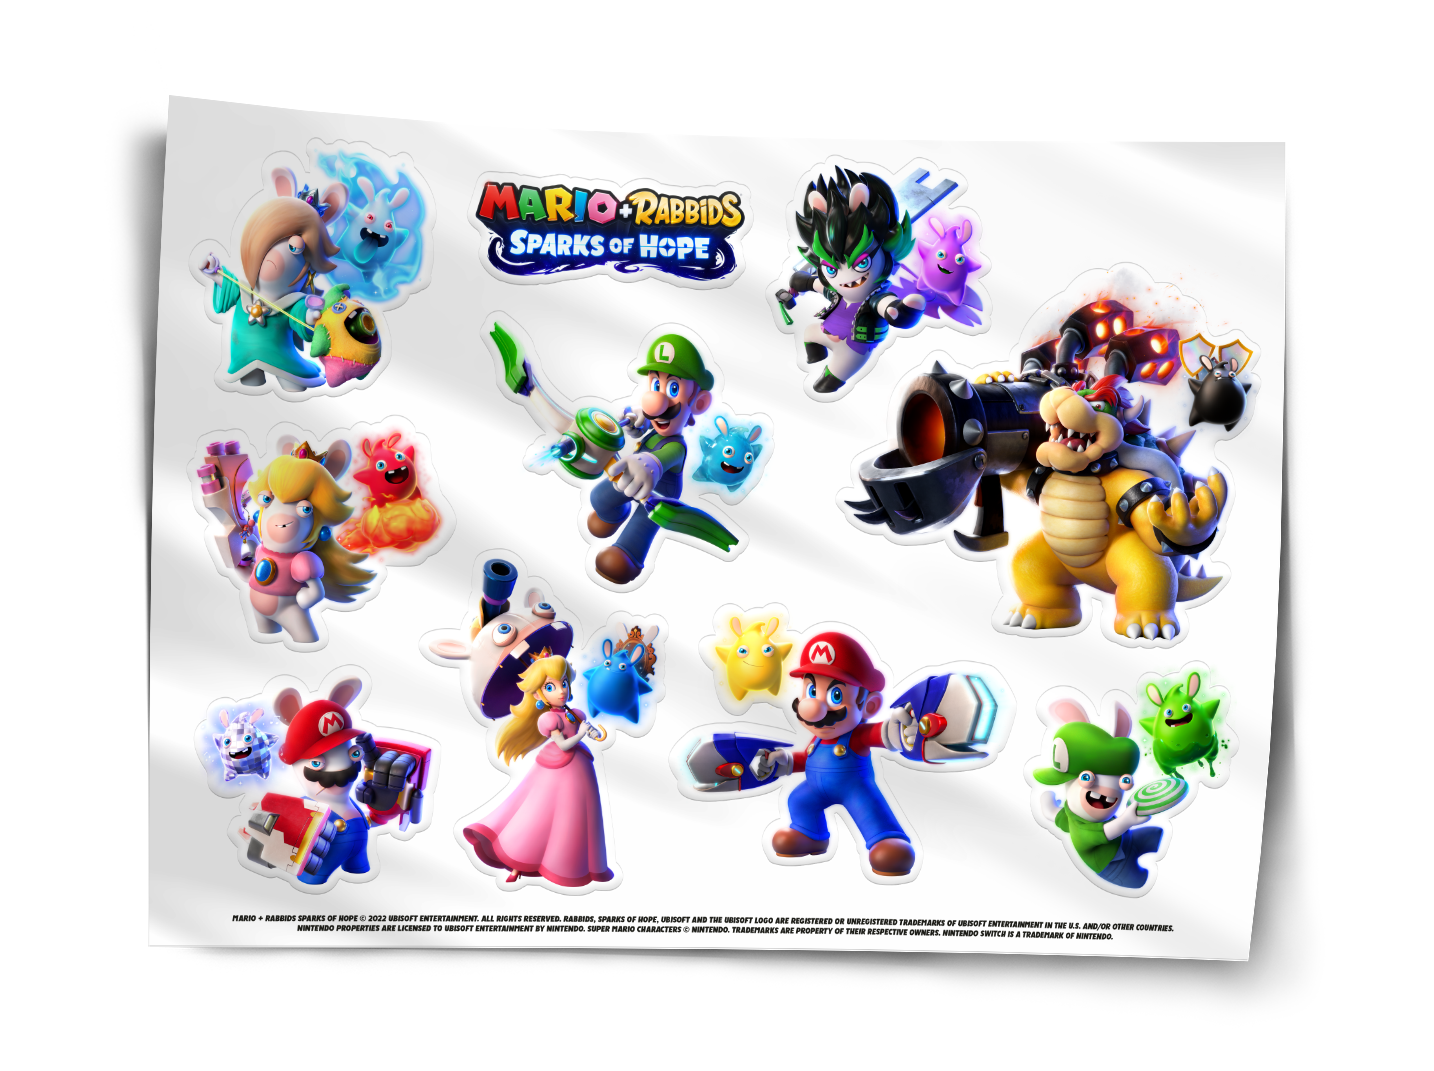 Mario + Rabbids: Sparks of Hope - Nintendo Switch + Exclusive Sticker Set - image 3 of 9